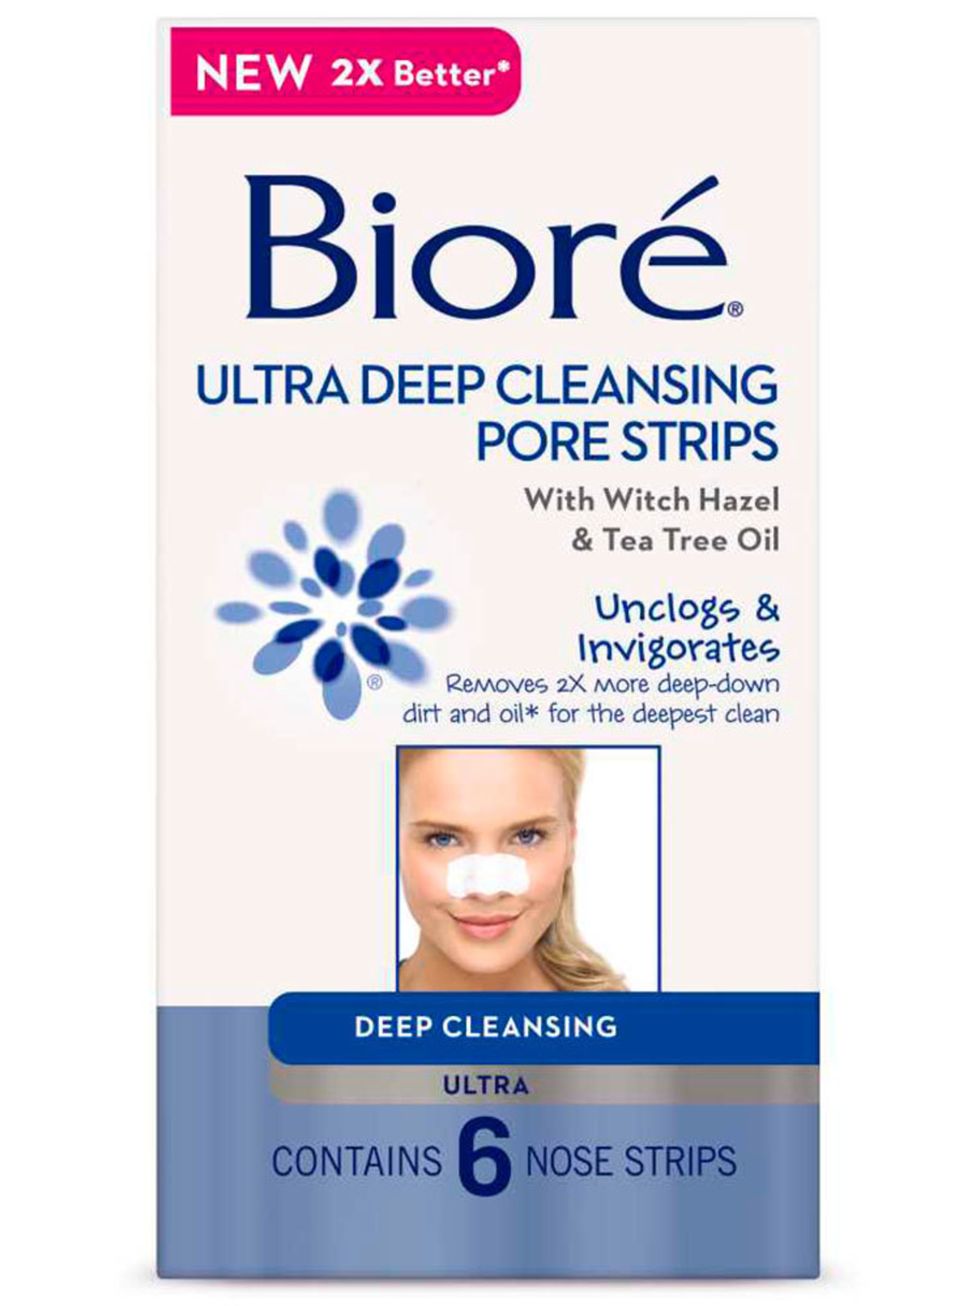 <p><a href="http://www.boots.com/en/Bior%C3%A9%C2%AE-Ultra-Deep-Cleansing-Pore-Strips-6-Nose-Strips_1250117/?cm_mmc=pla-_-google-_-PLAs-_-Boots+Shopping+-+Category+-+Beauty" target="_blank">Bioré Ultra Cleansing Pore Strips, £7.99</a></p>

<p>Nose strips 